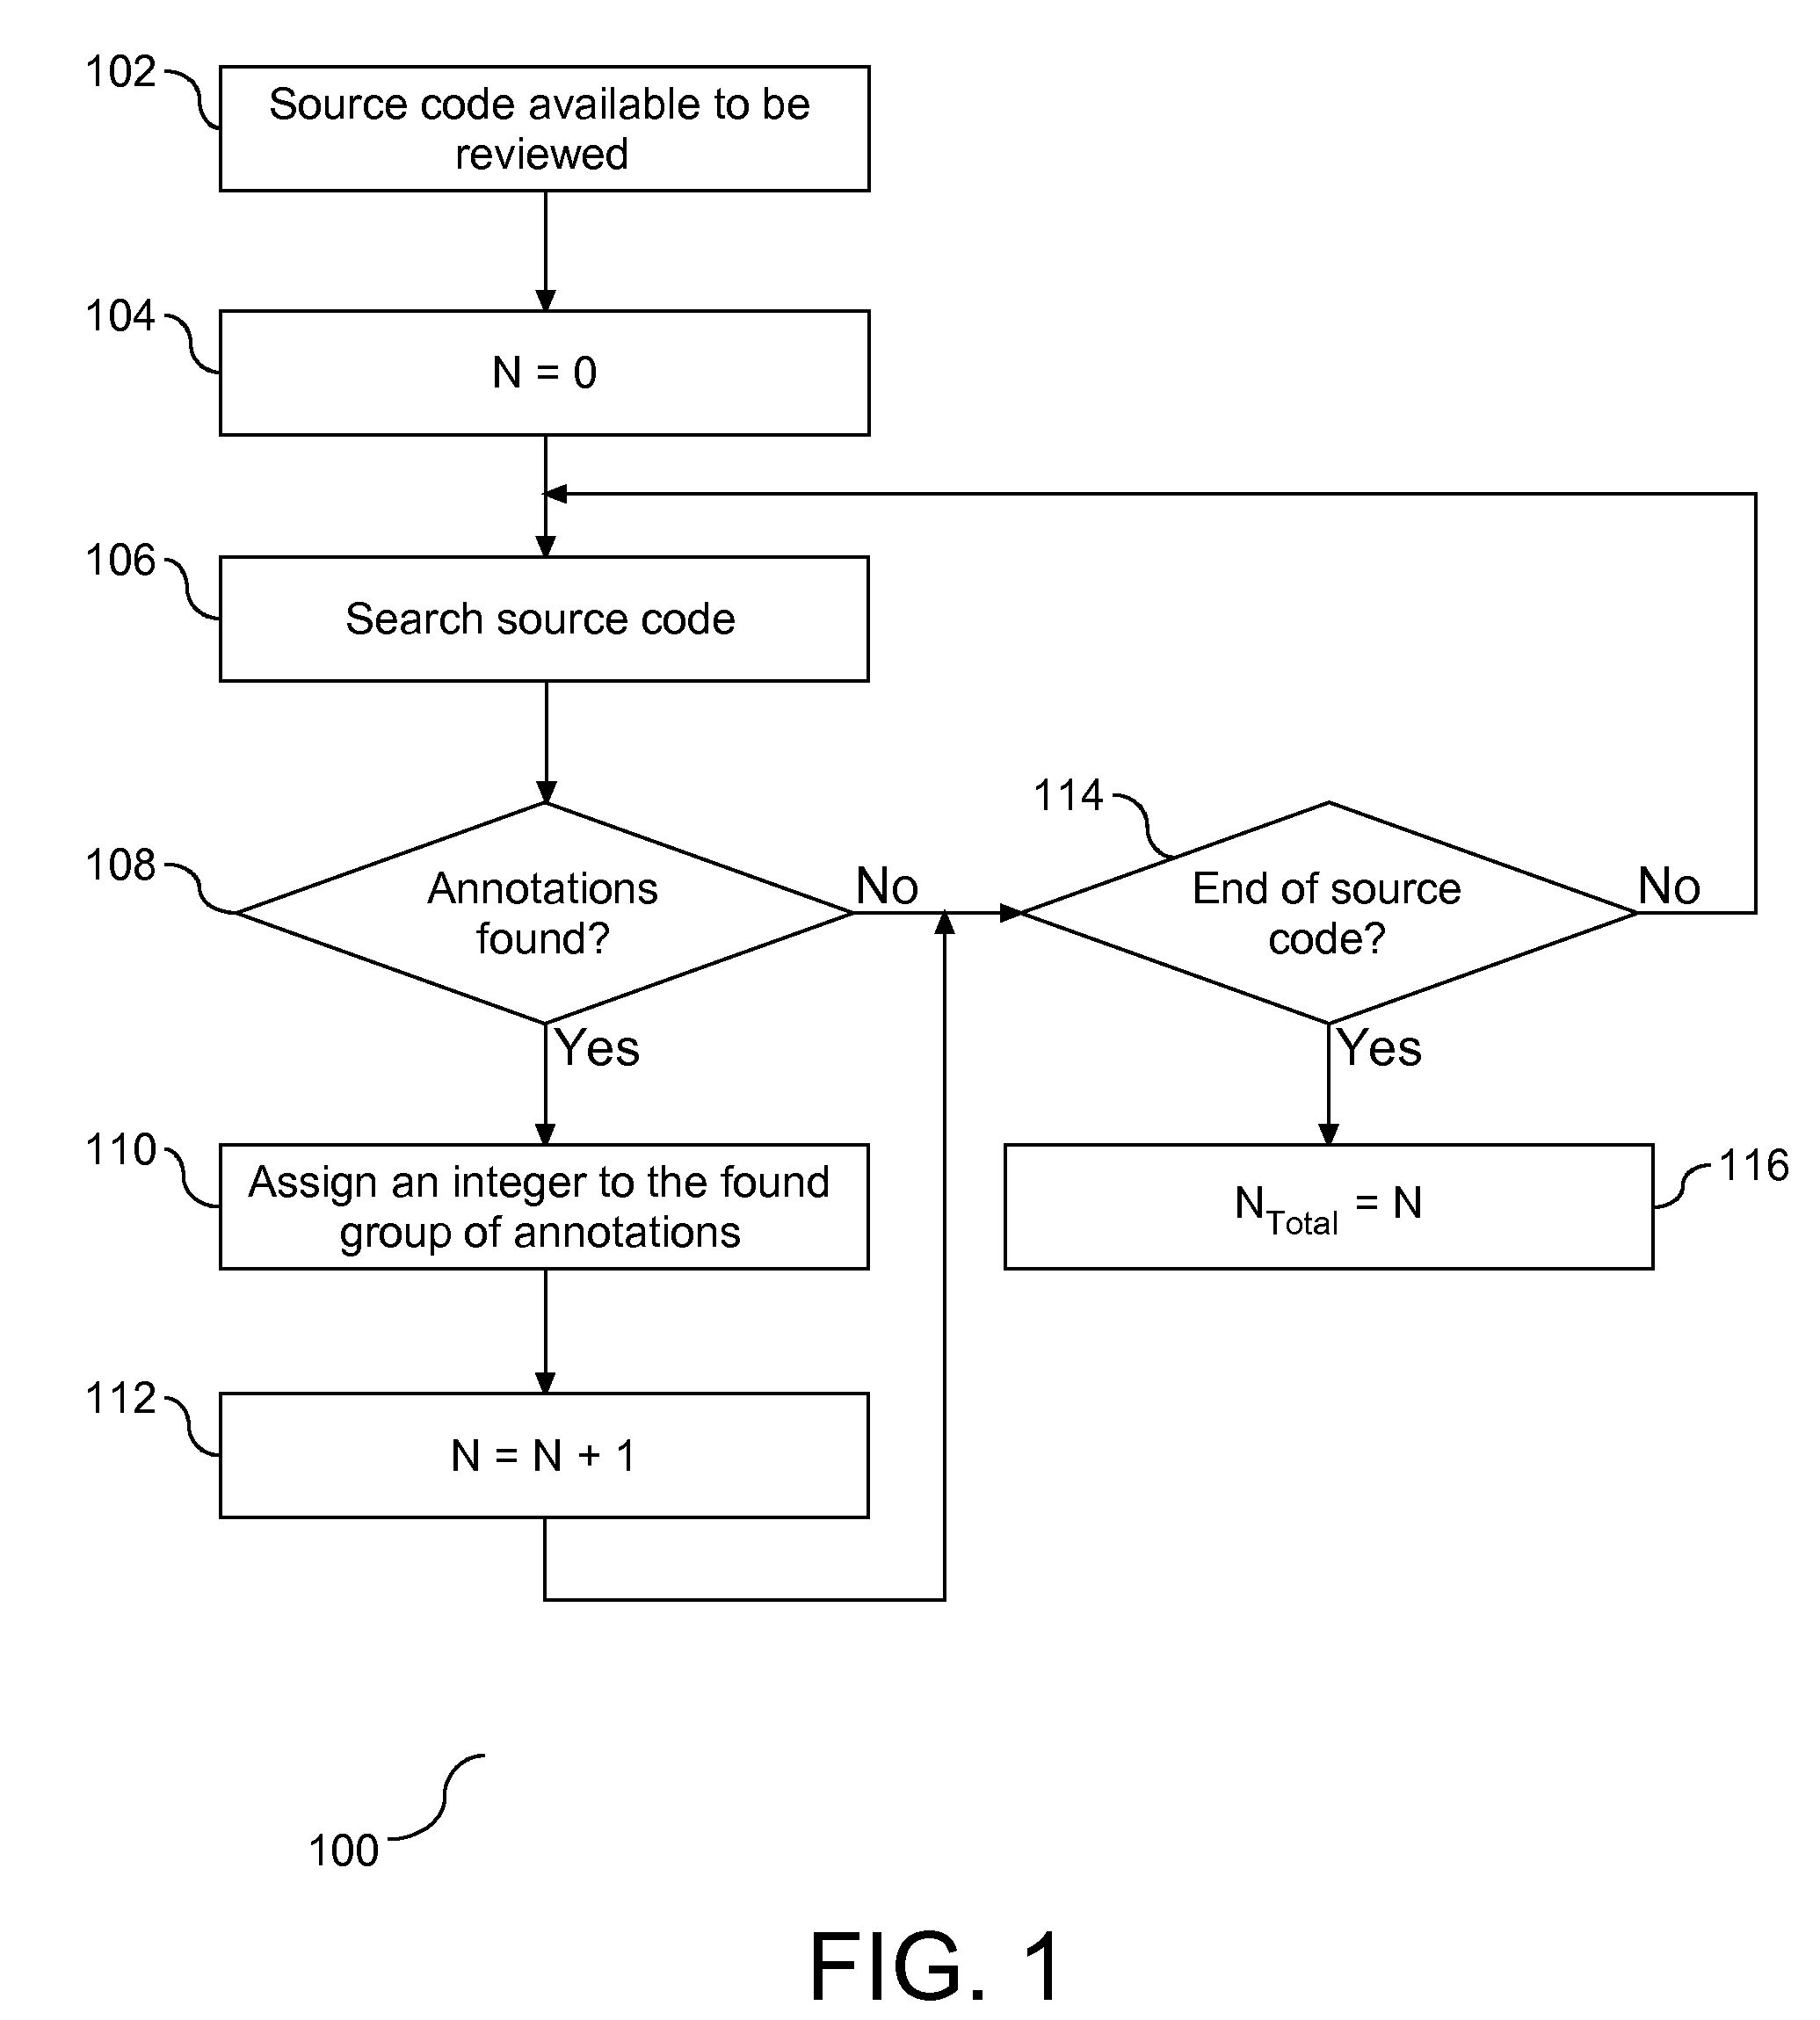 Method To Transfer Annotation Across Versions of the Data